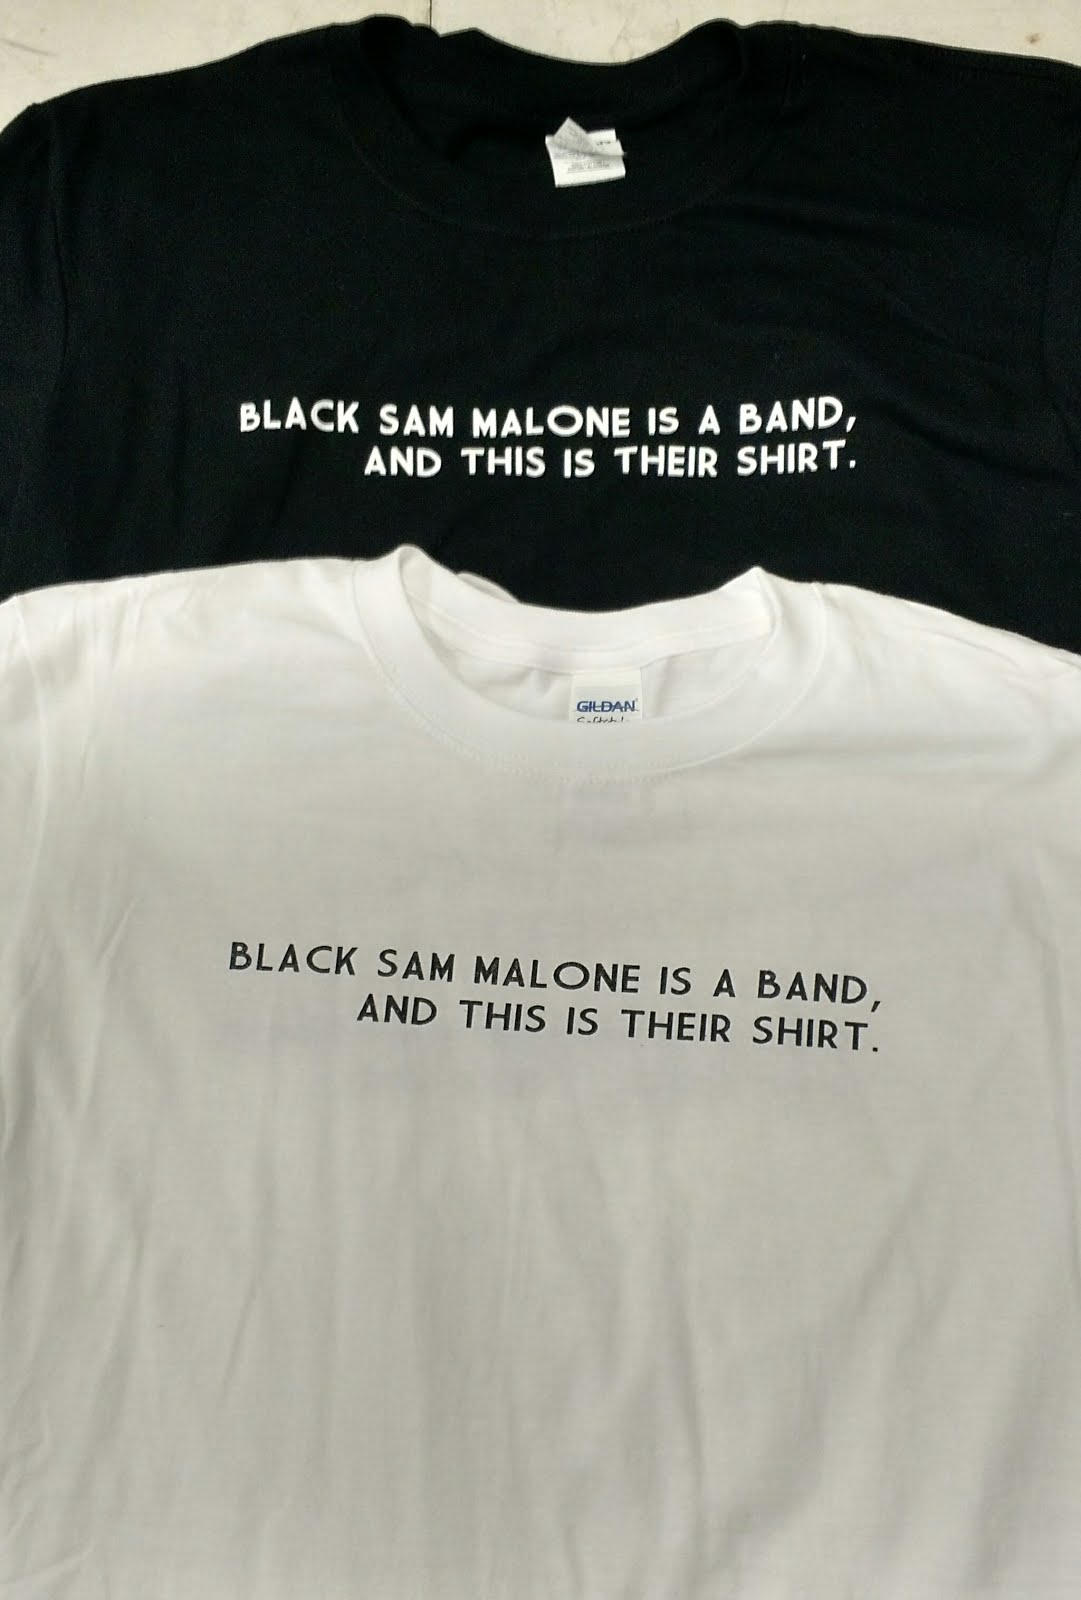 $10 - Black Sam Malone is a band, and this is their shirt / Gildan Softstyle 100% cotton T